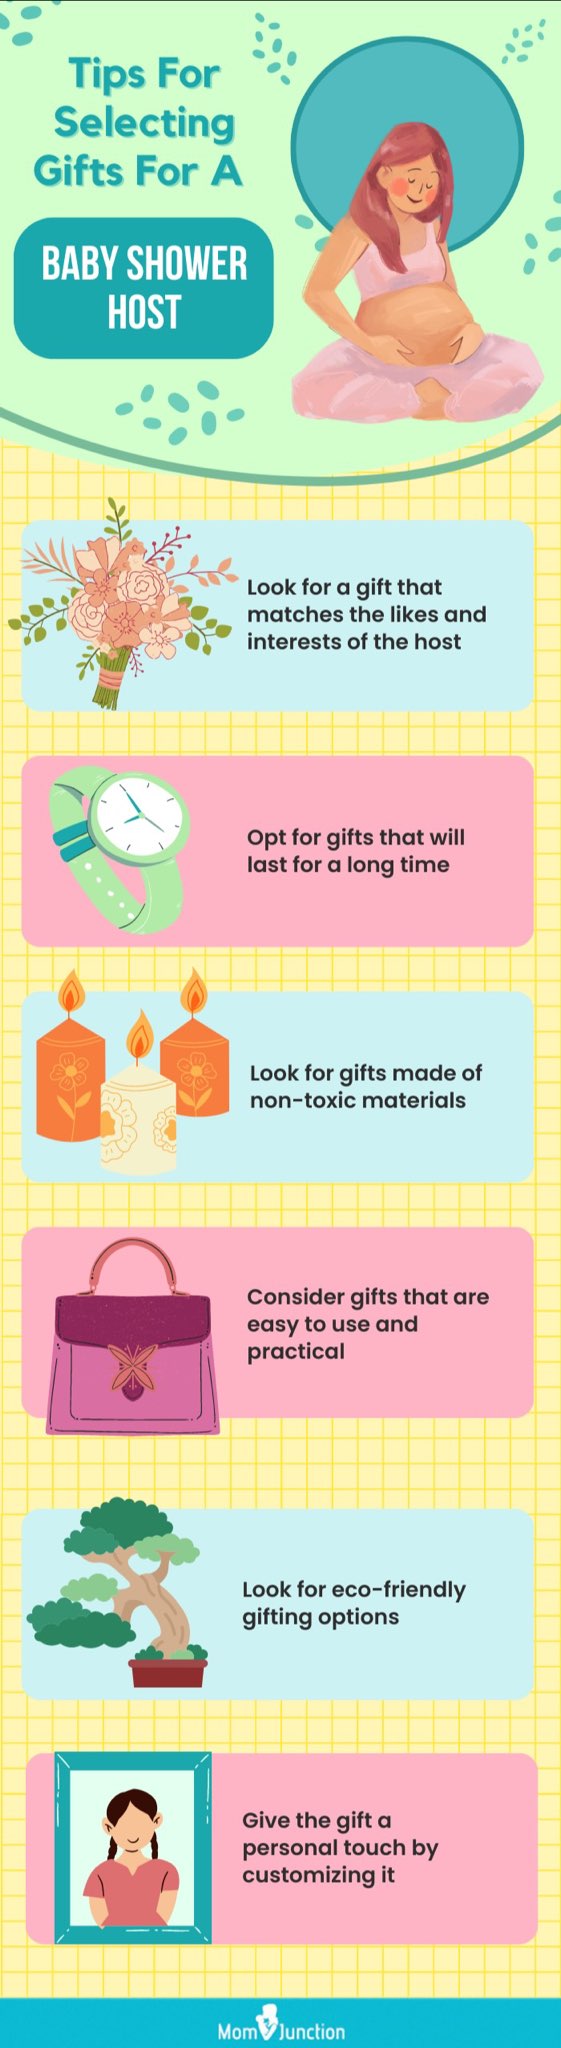 Tips For Selecting Gifts For A Baby Shower Host (Infographic)